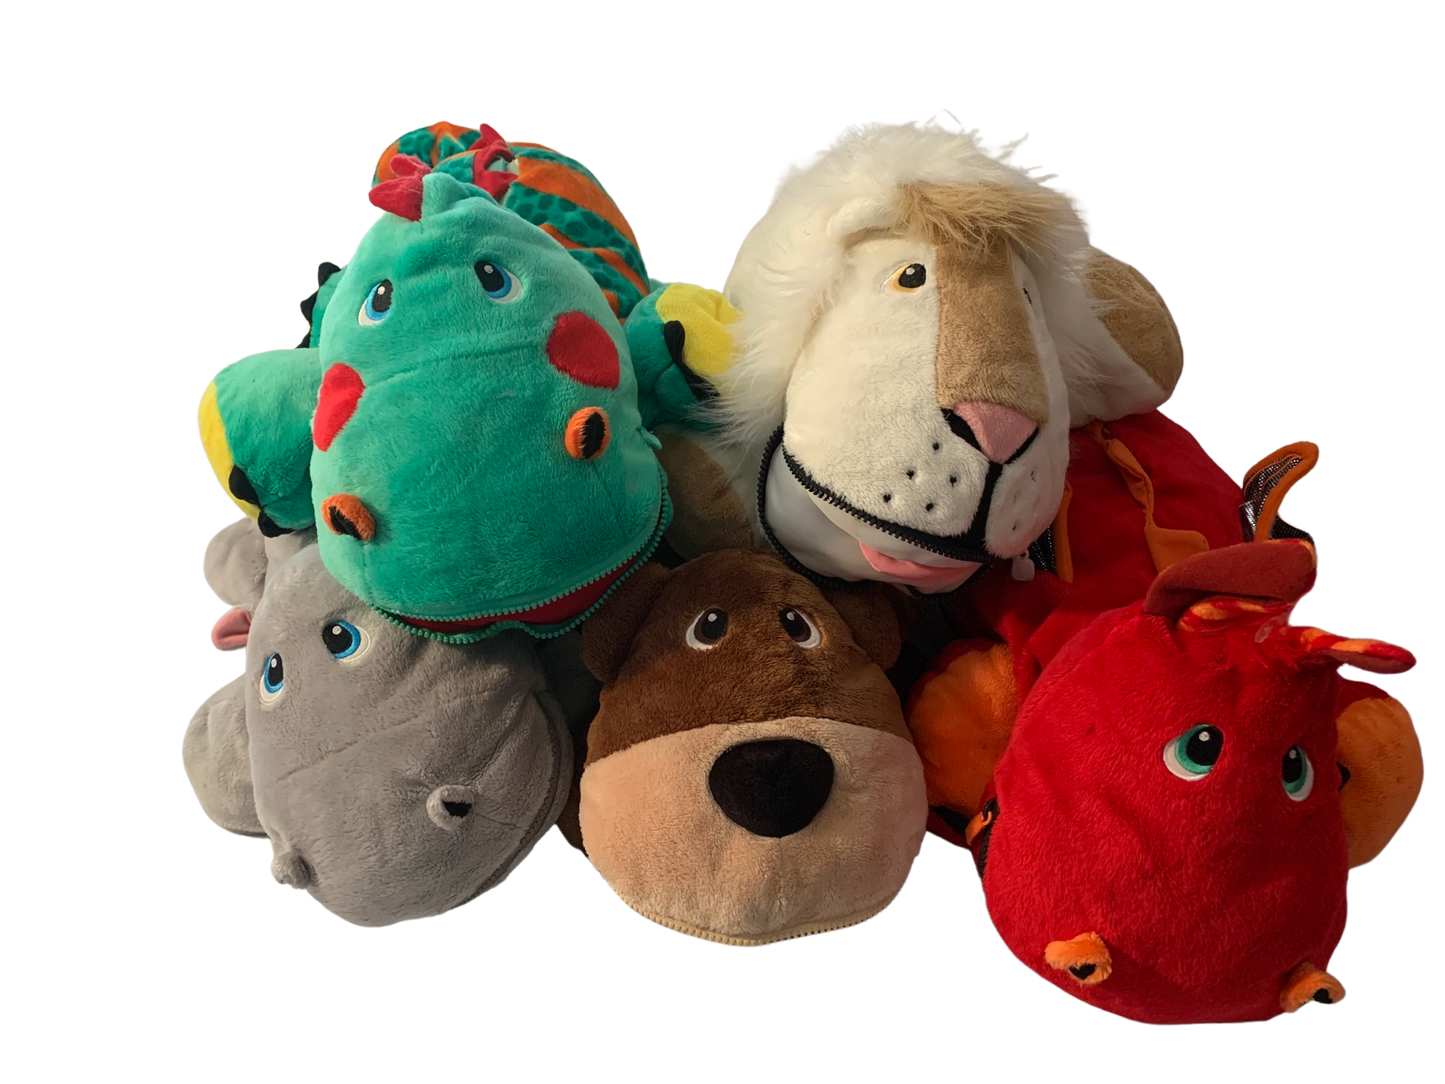 Weighted stuffed animal, JUMBO lion, hippo, dragon, bear or dinosaur sensory toy with 5-10 lbs, autism weighted buddy